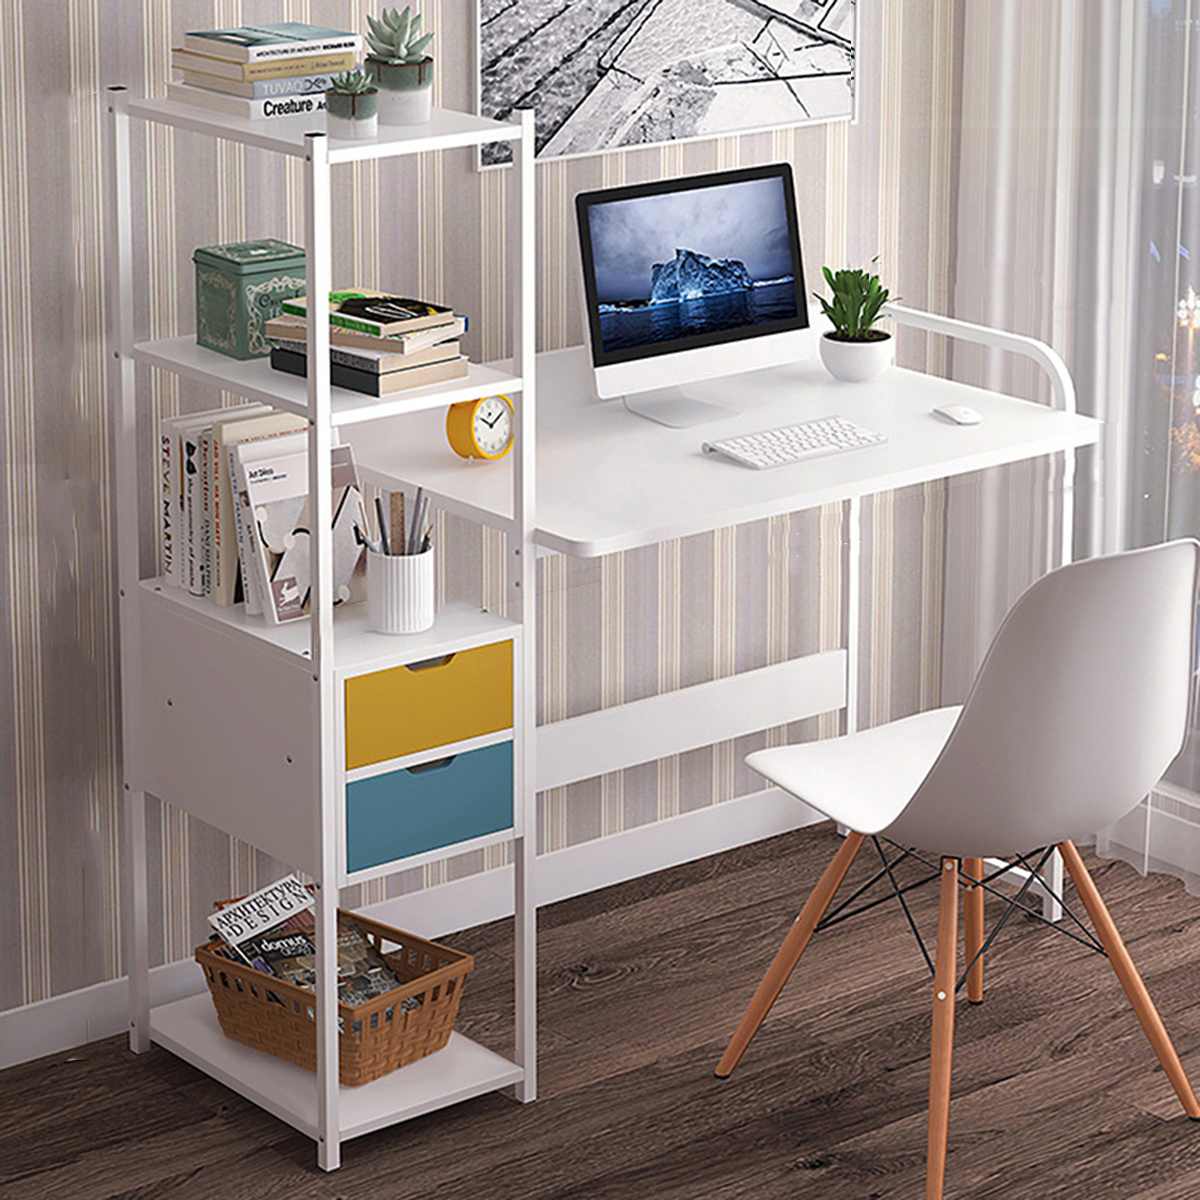 Computer Desk Laptop Writing Table Study Table with Shelves Drawers Large Wood Office PC Laptop Workstation Home Gaming Desk